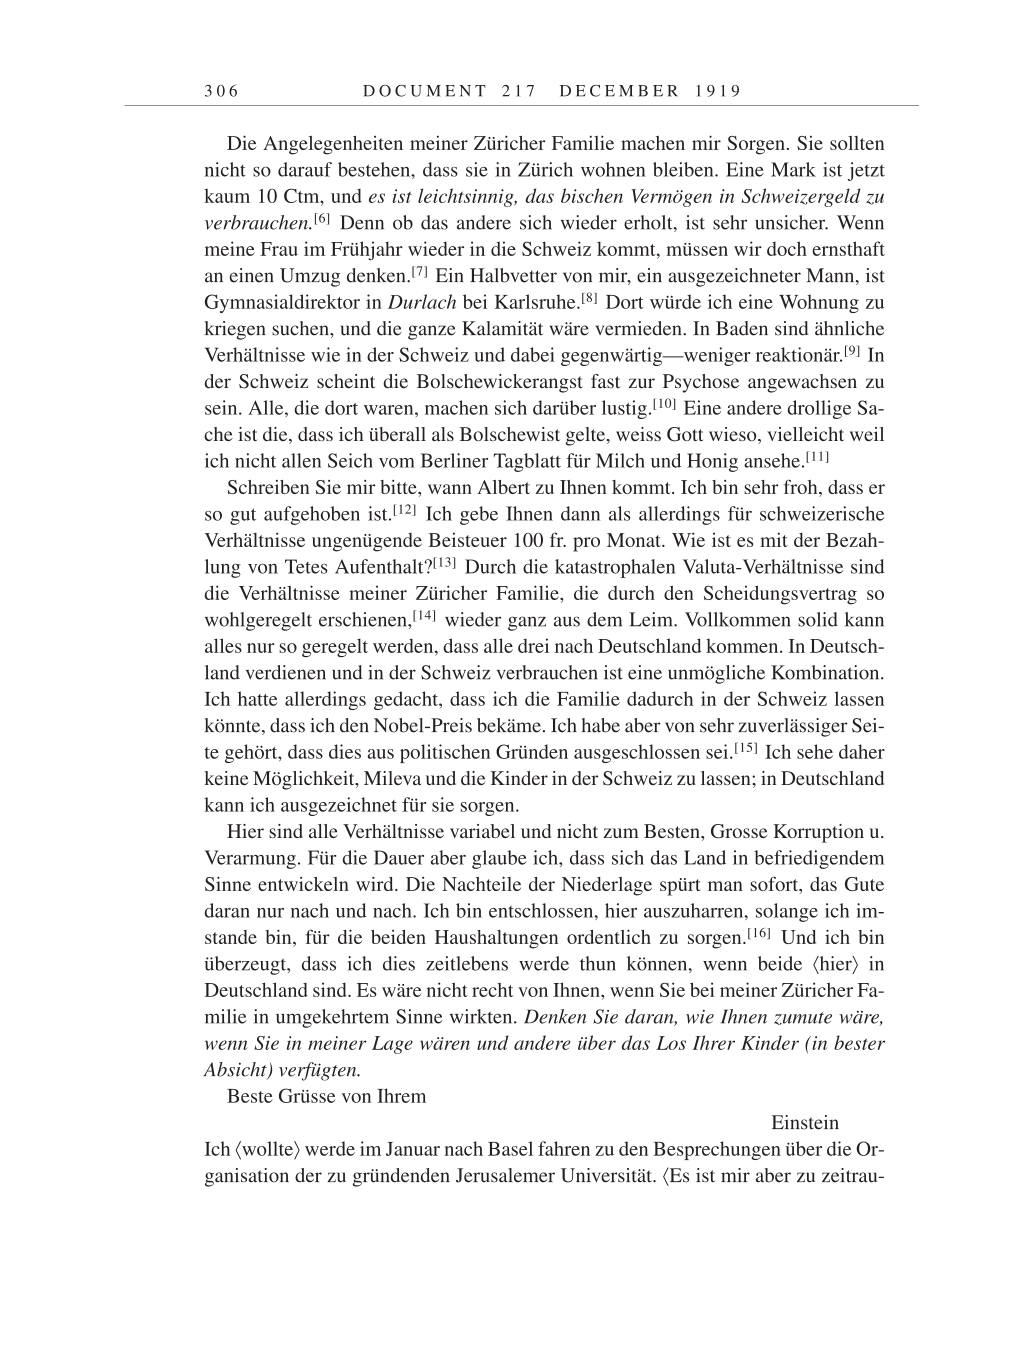 Volume 9: The Berlin Years: Correspondence January 1919-April 1920 page 306